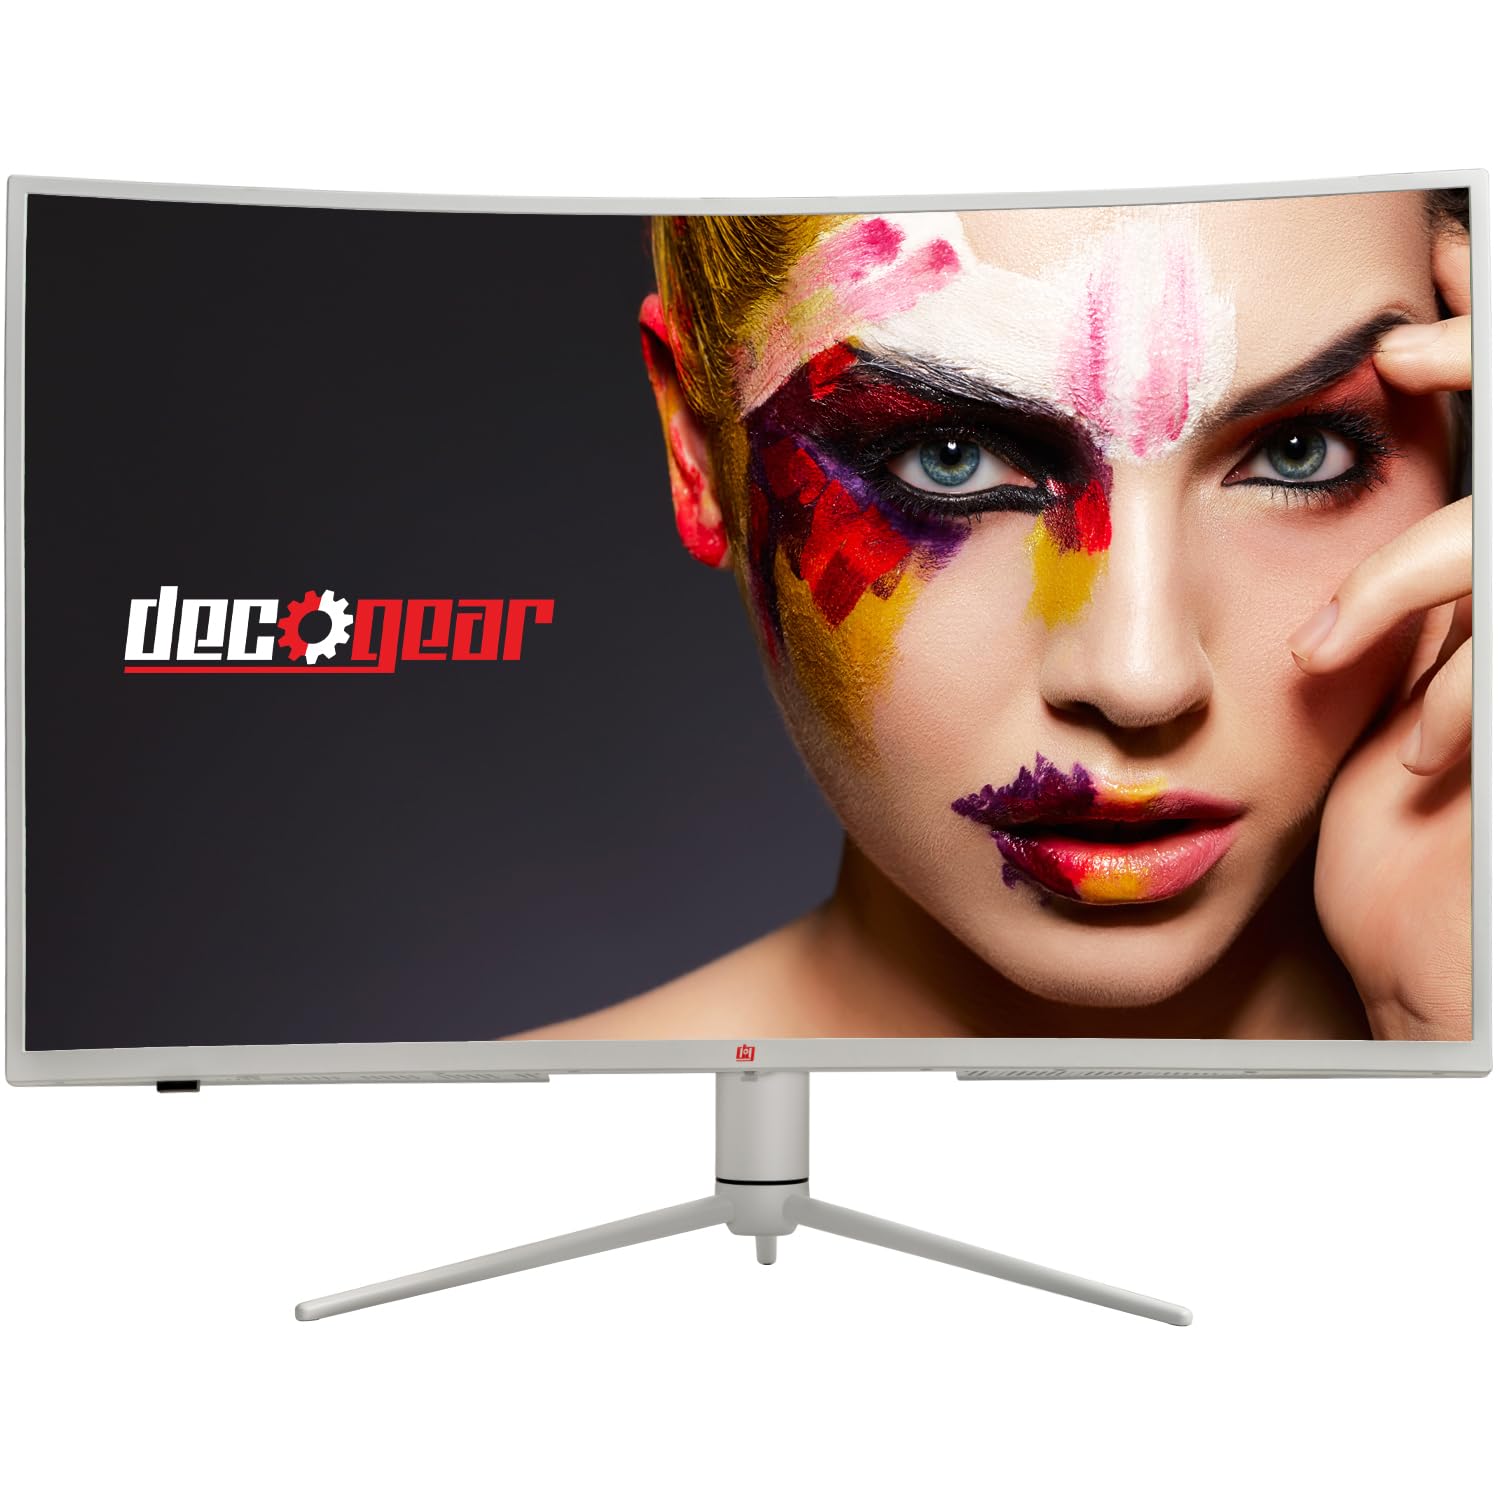 39” Deco Gear 2560x1440 165Hz Curved Ultrawide HDR400 Gaming Monitor $300 + free s/h